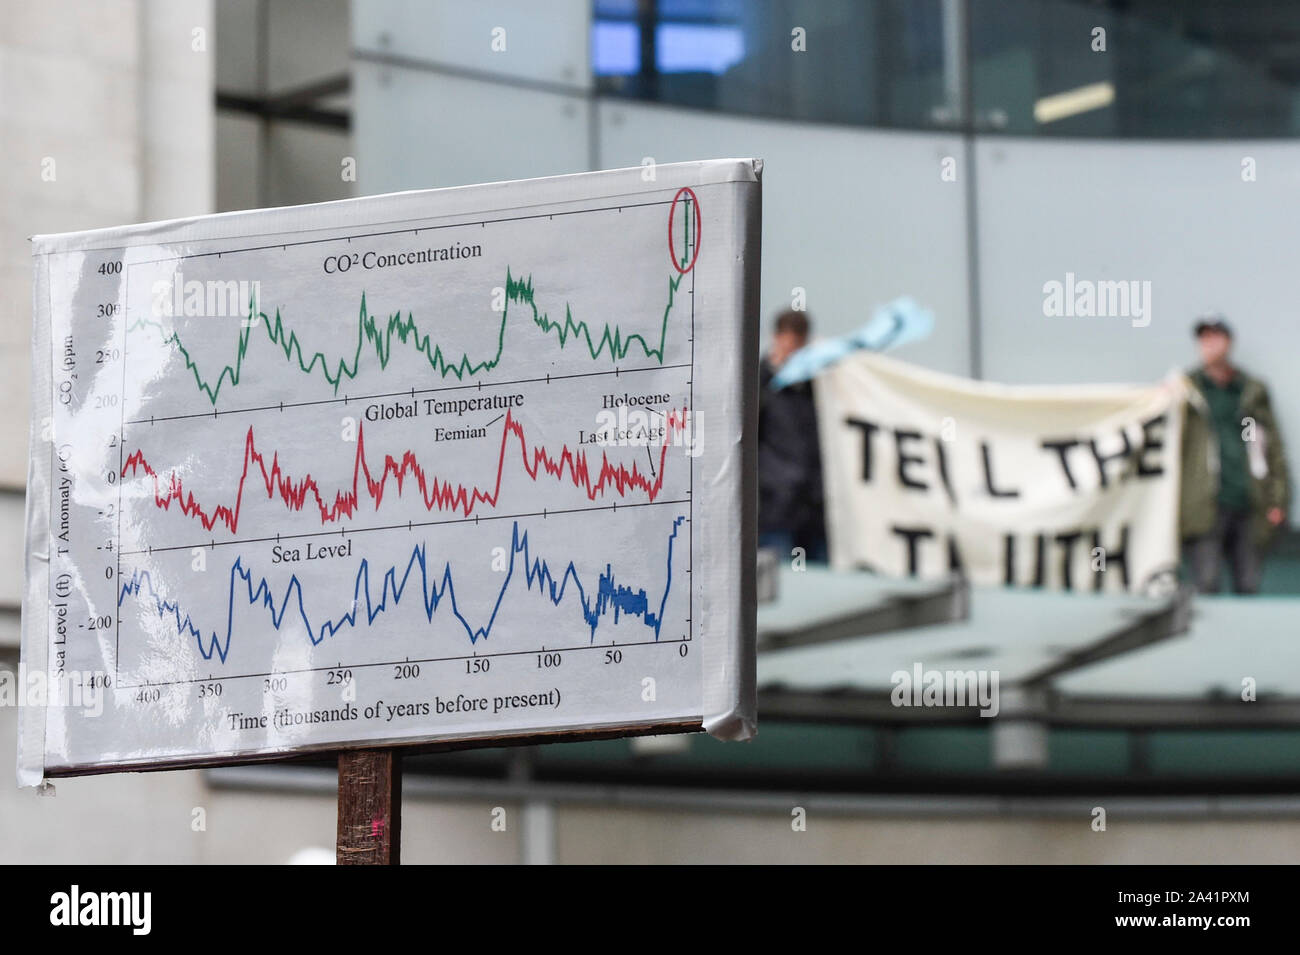 London, UK. 11 October 2019.  A sign depicting climate statistics in front of members of Extinction Rebellion who have climbed onto the canopy outside the headquarters of BBC at Portland Place on day 5 of their demonstrations.  Climate activists are demanding that the government takes immediate action against the negative effects of climate change.  Credit: Stephen Chung / Alamy Live News Stock Photo